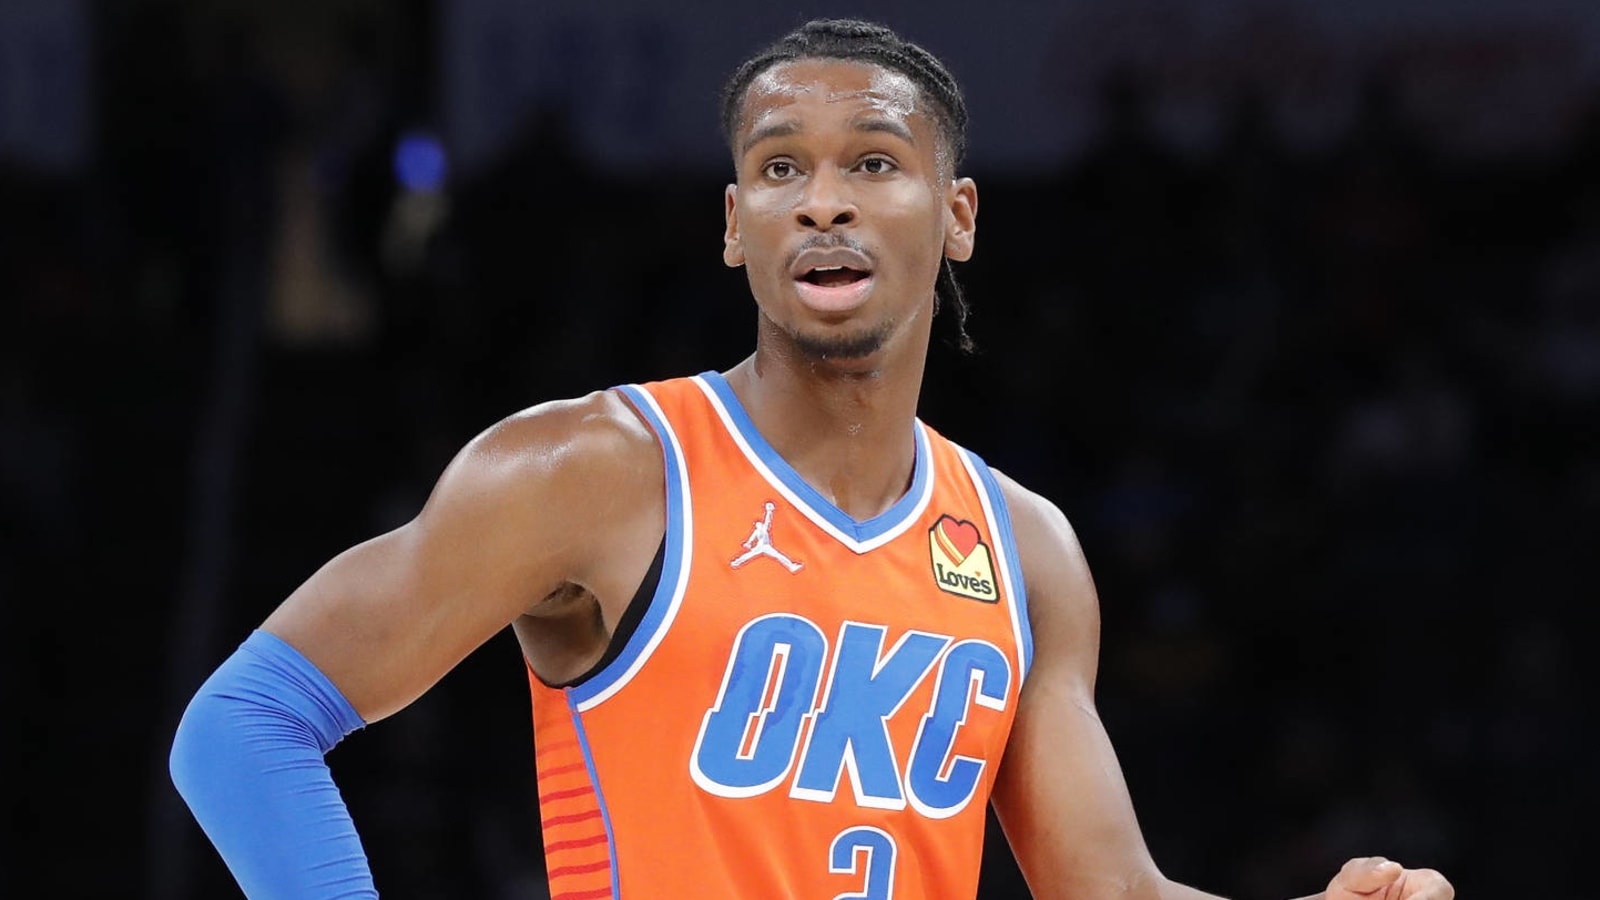 Thunder's Shai Gilgeous-Alexander in concussion protocol, out indefinitely